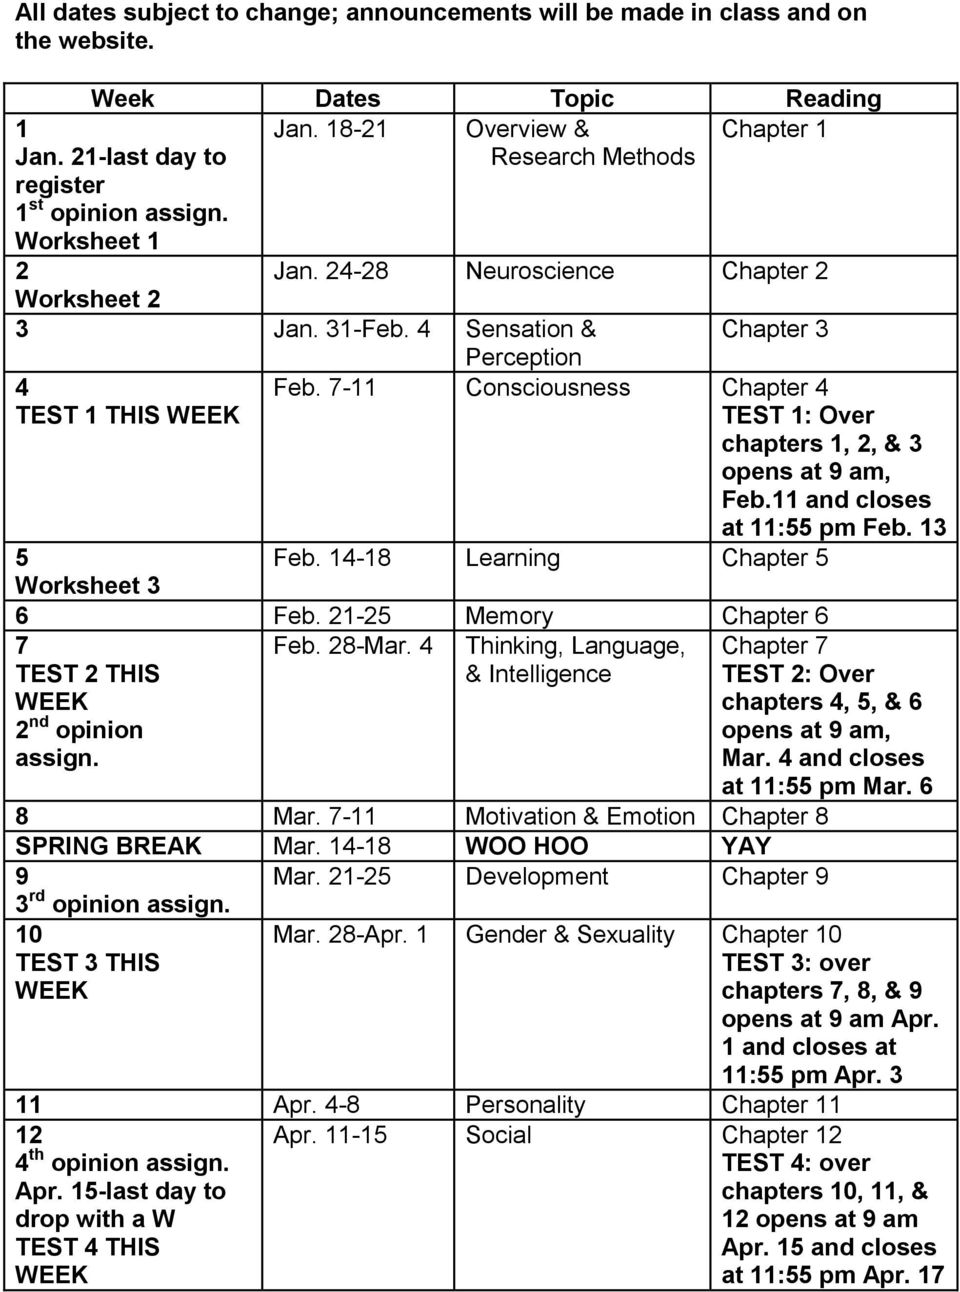 7-11 Consciousness Chapter 4 TEST 1: Over chapters 1, 2, & 3 opens at 9 am, Feb.11 and closes at 11:55 pm Feb. 13 5 Feb. 14-18 Learning Chapter 5 Worksheet 3 6 Feb.